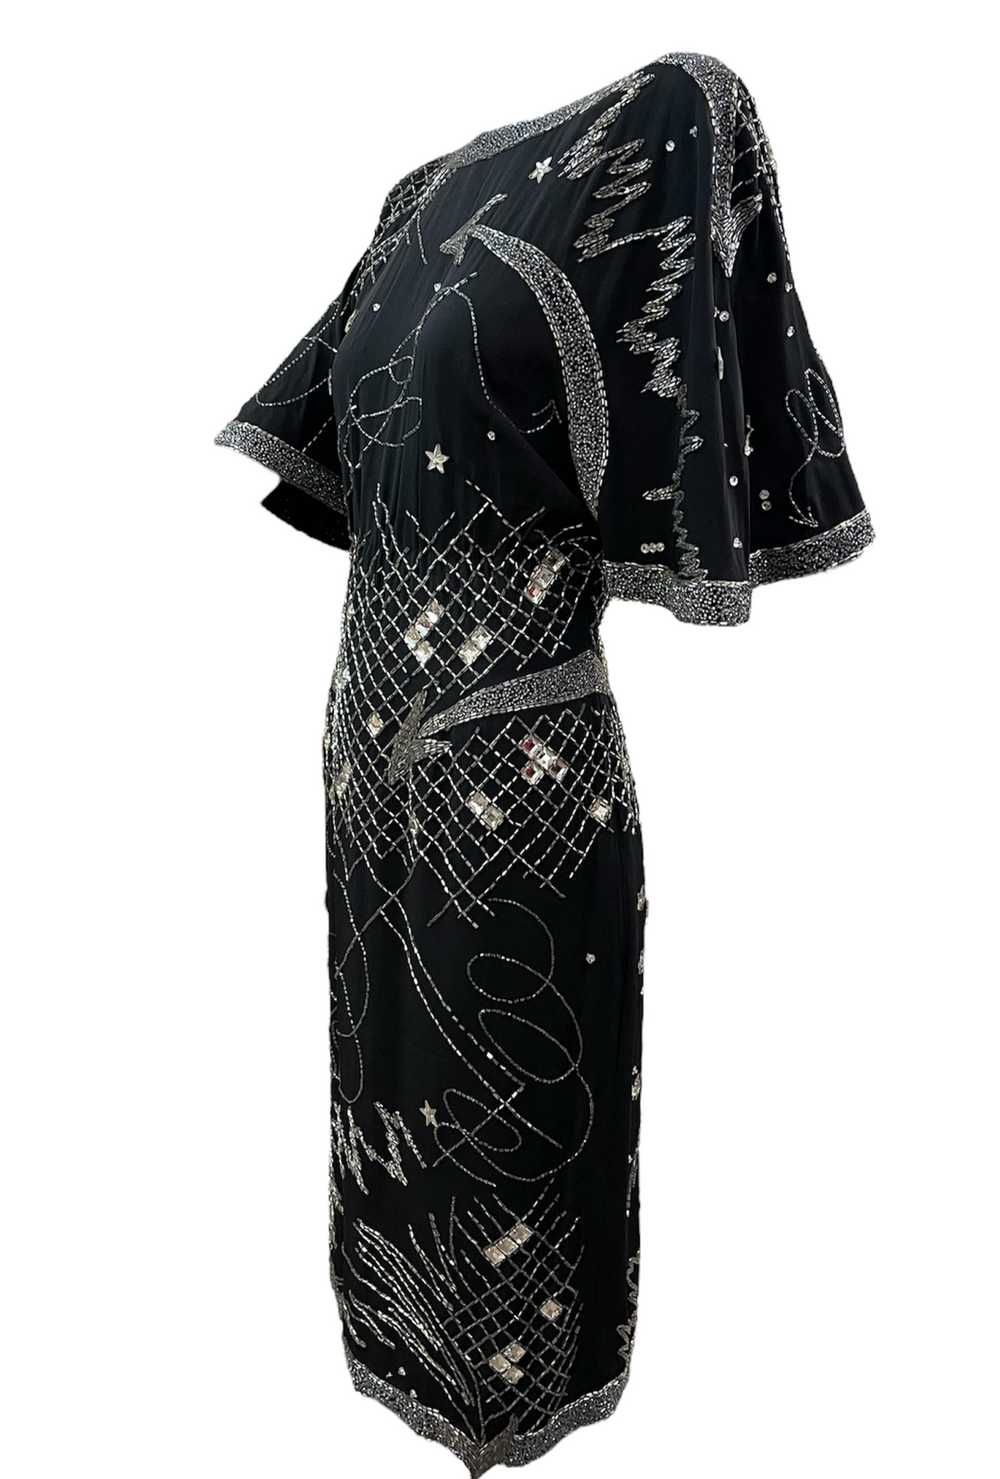 Fabrice 80s Black Beaded Cocktail Dress with Stars - image 2